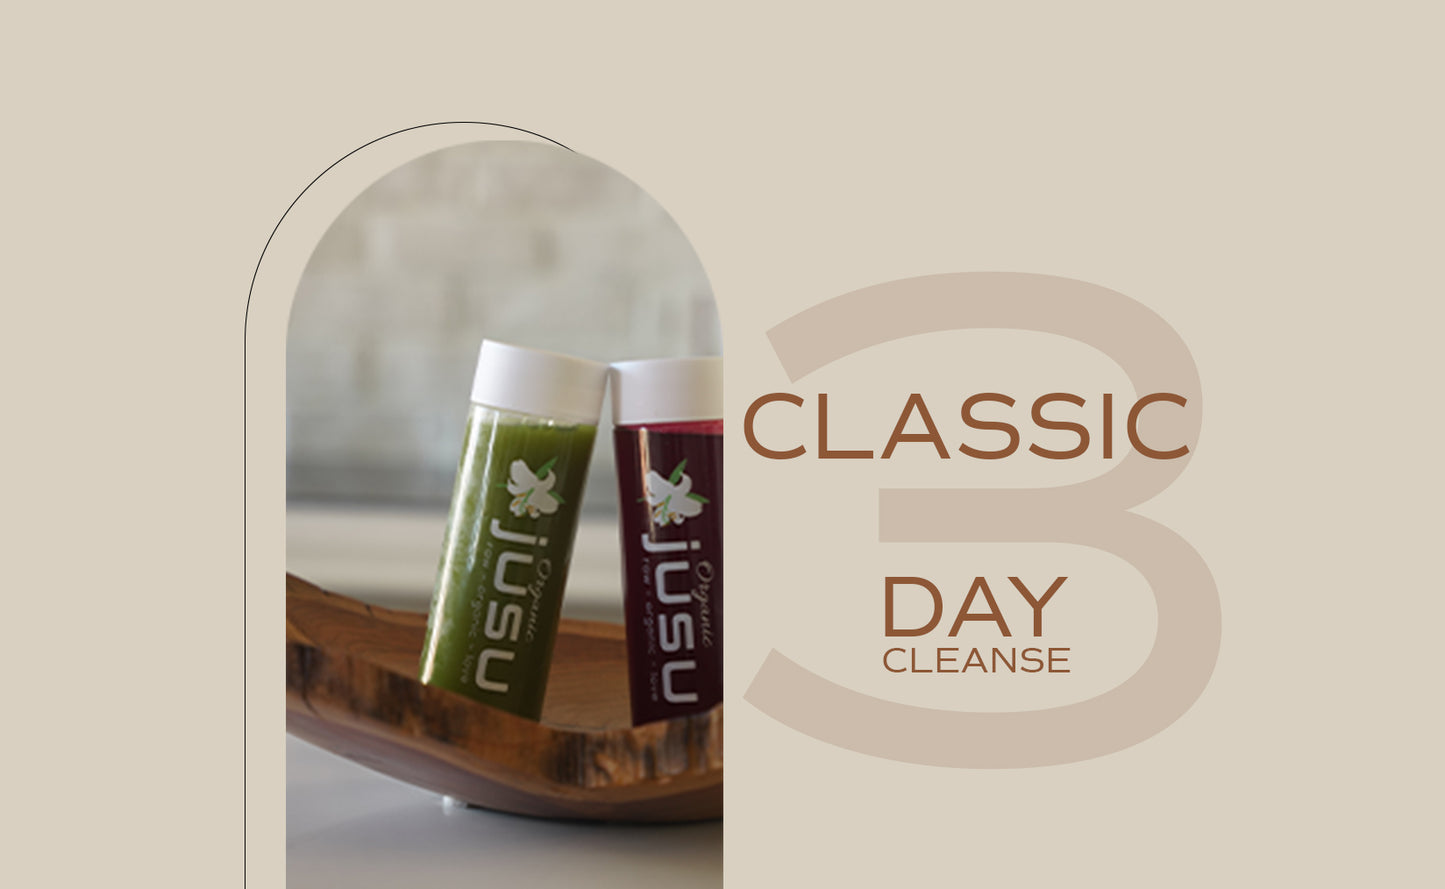 Classic 3 Day Cleanse